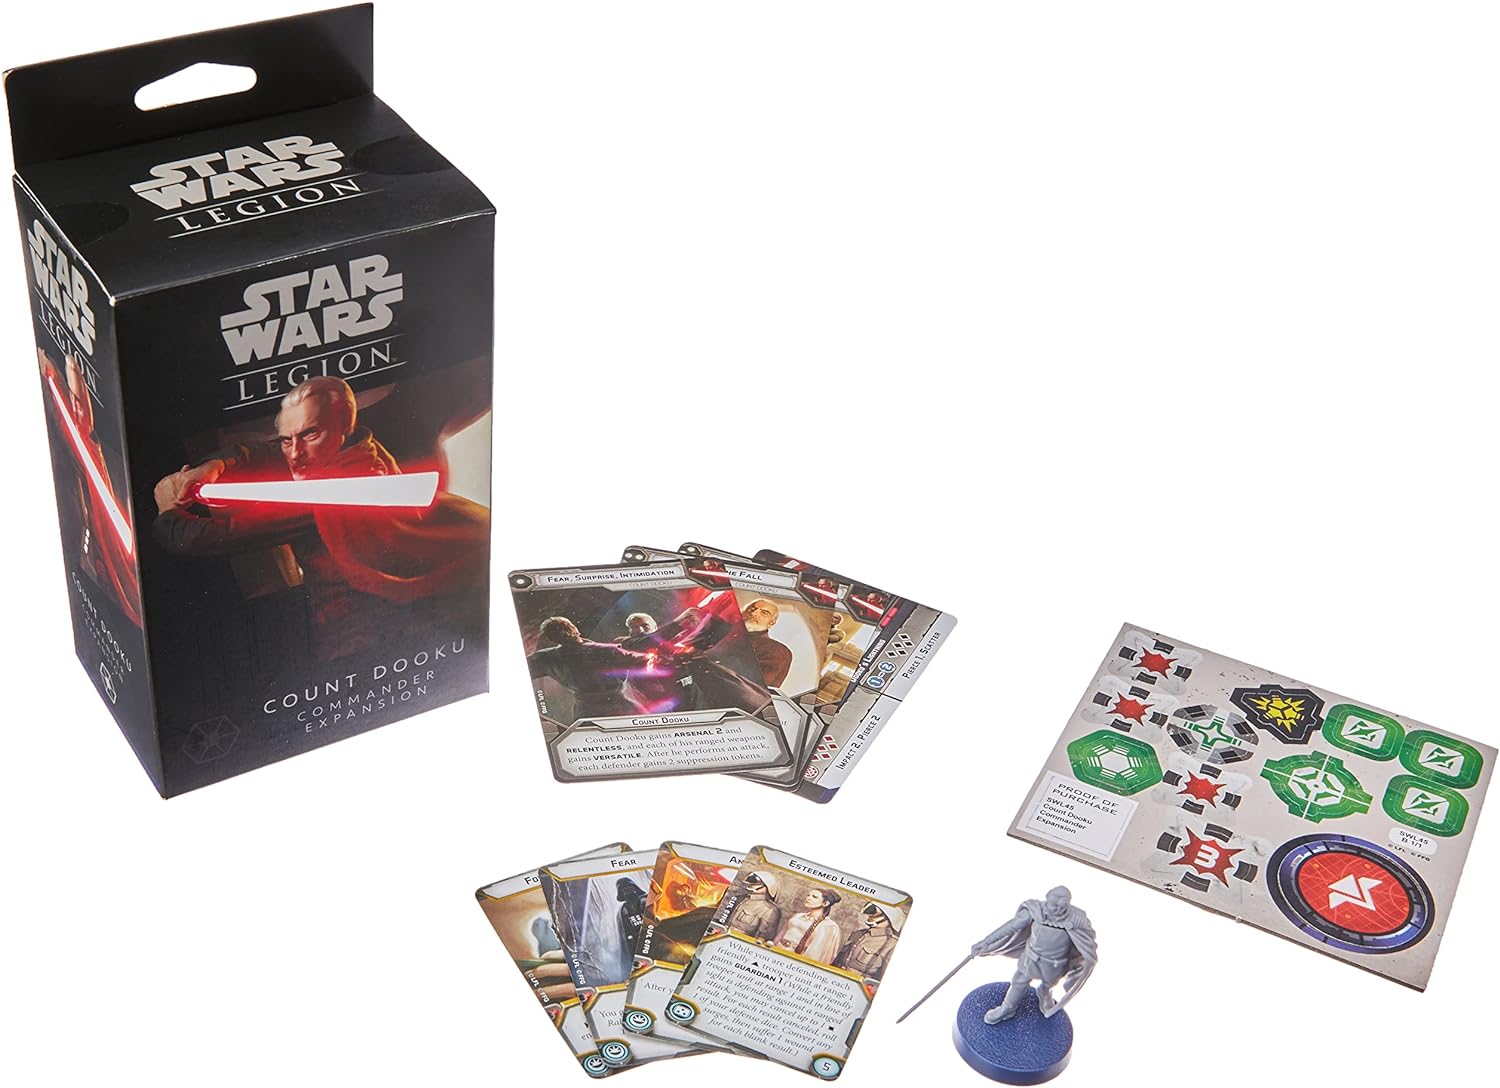 Star Wars Legion: Count Dooku Commander Expansion - Loaded Dice